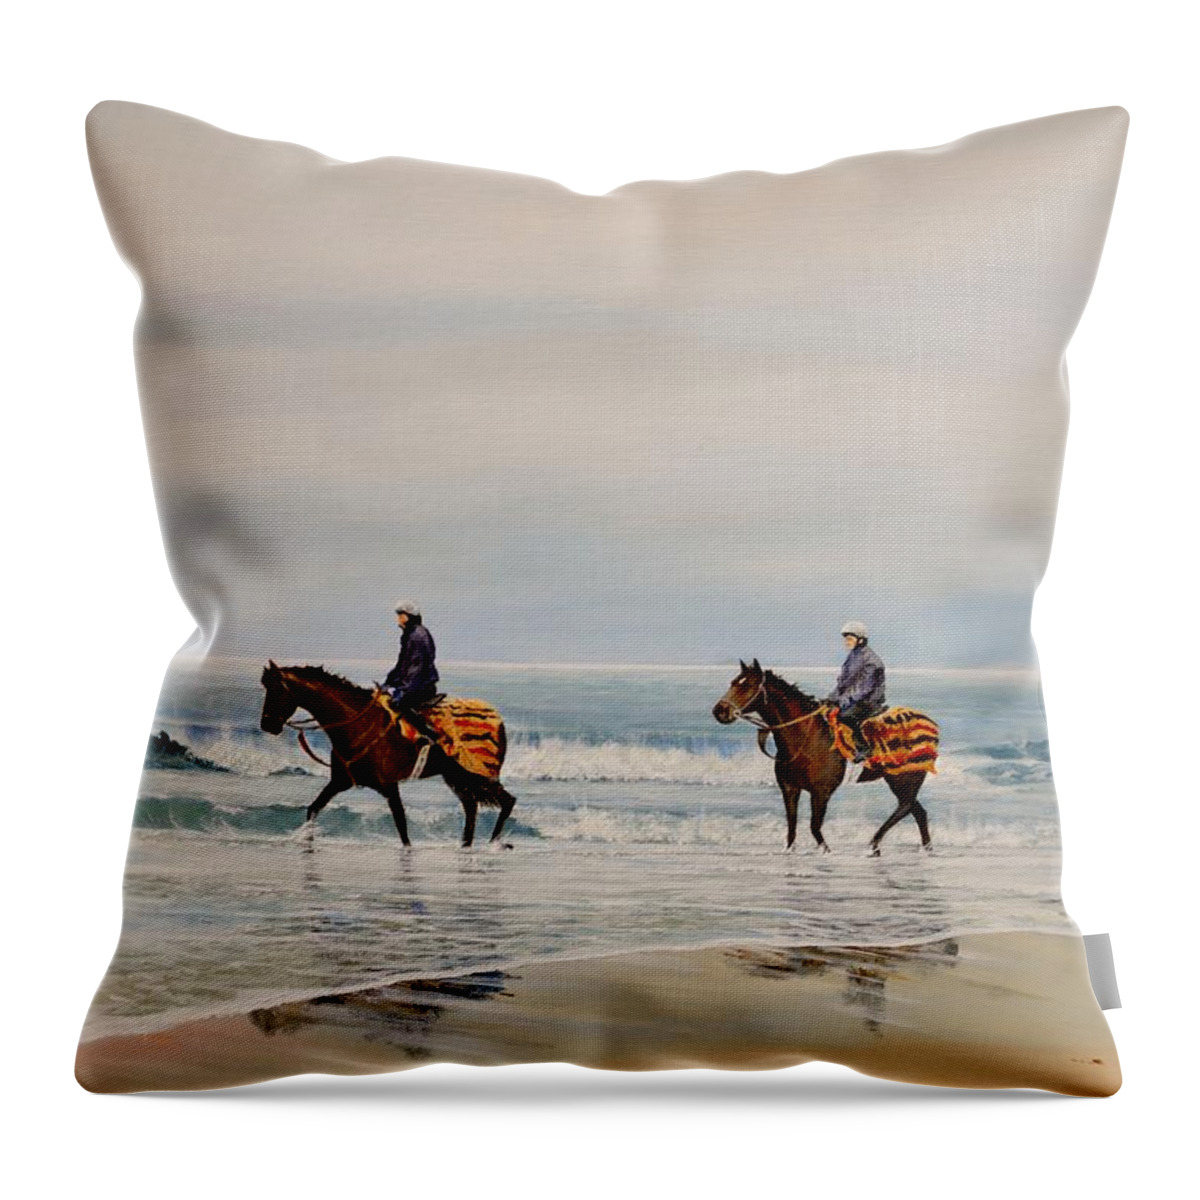 Horses Throw Pillow featuring the painting Early Morning Paddle by Barry BLAKE